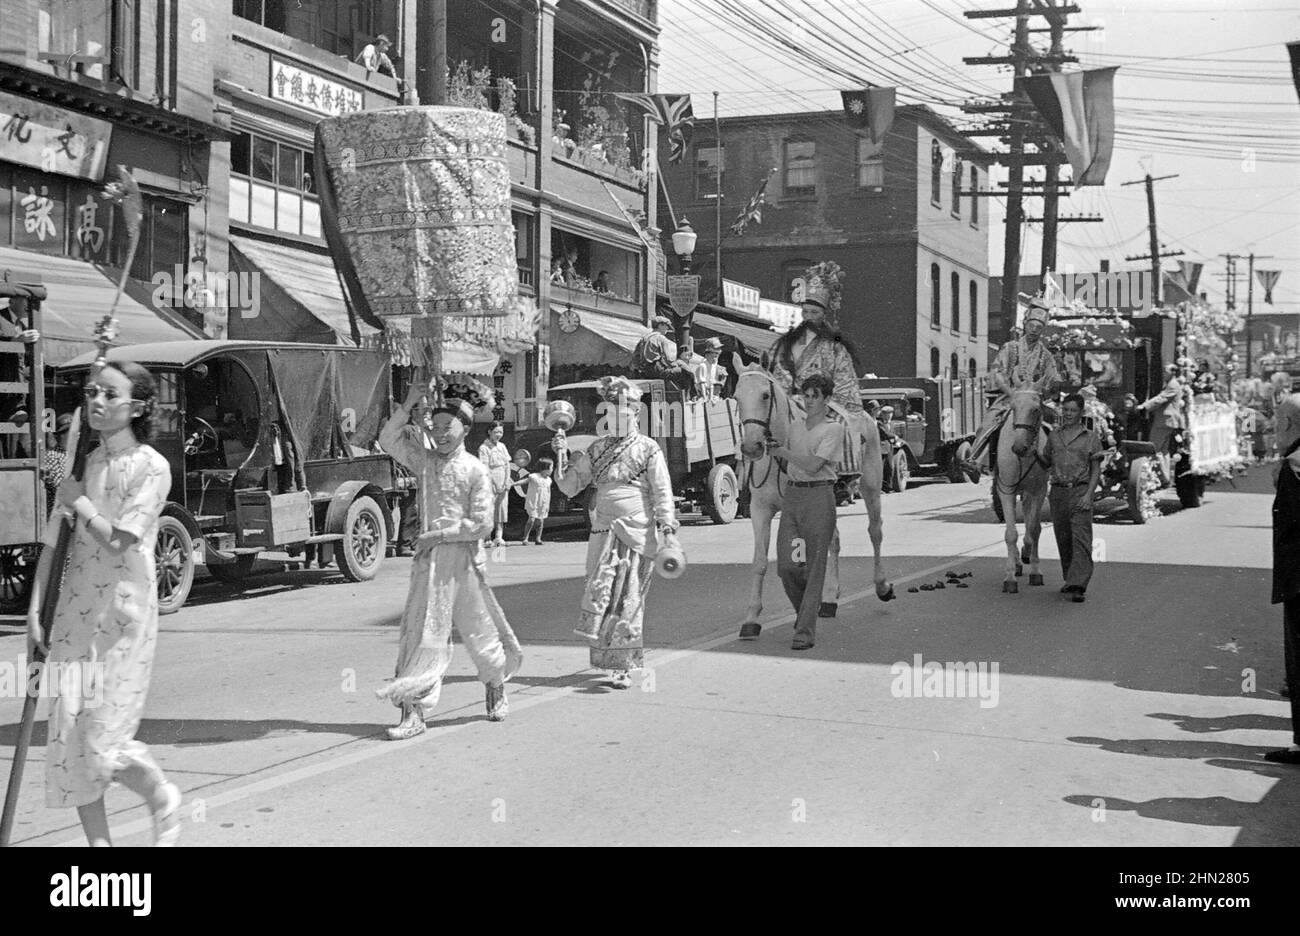 Vinatge black and white photograph ca. 1936 of a parade on Pender Street  in Chinatown,  Vancouver, British Columbia, Canada Stock Photo